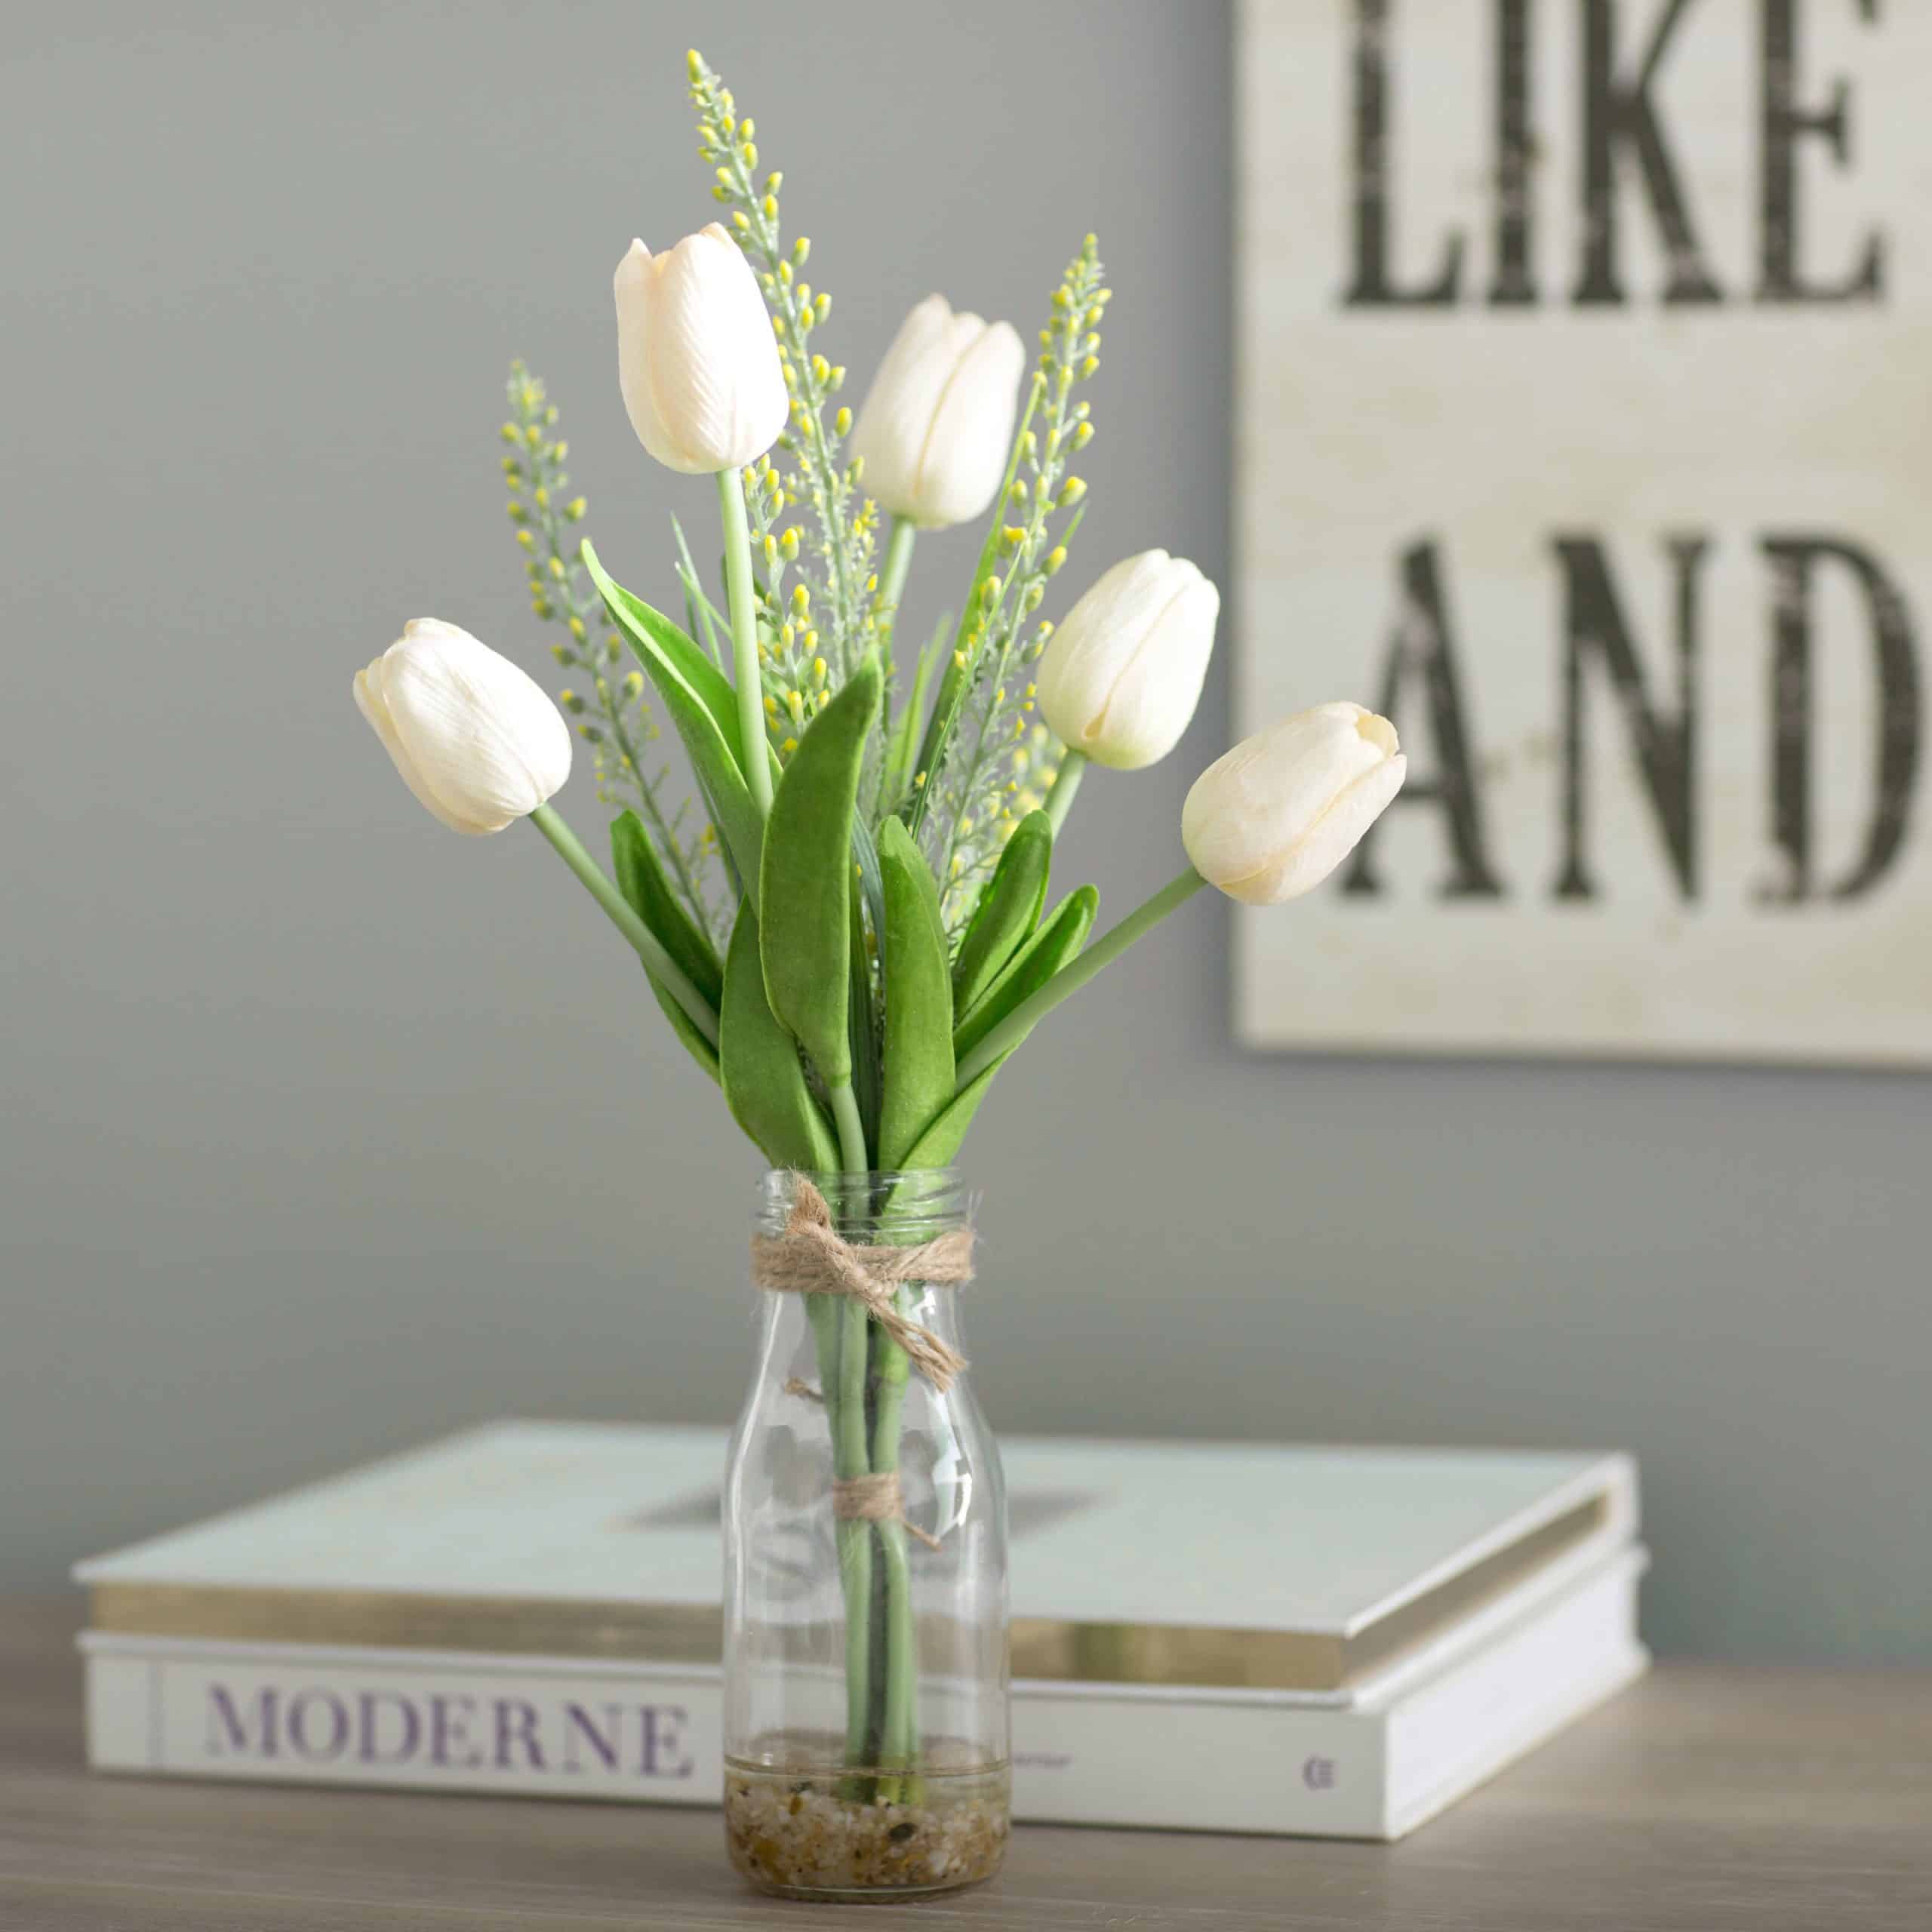 Tulips Add Freshness To Your Dining Room